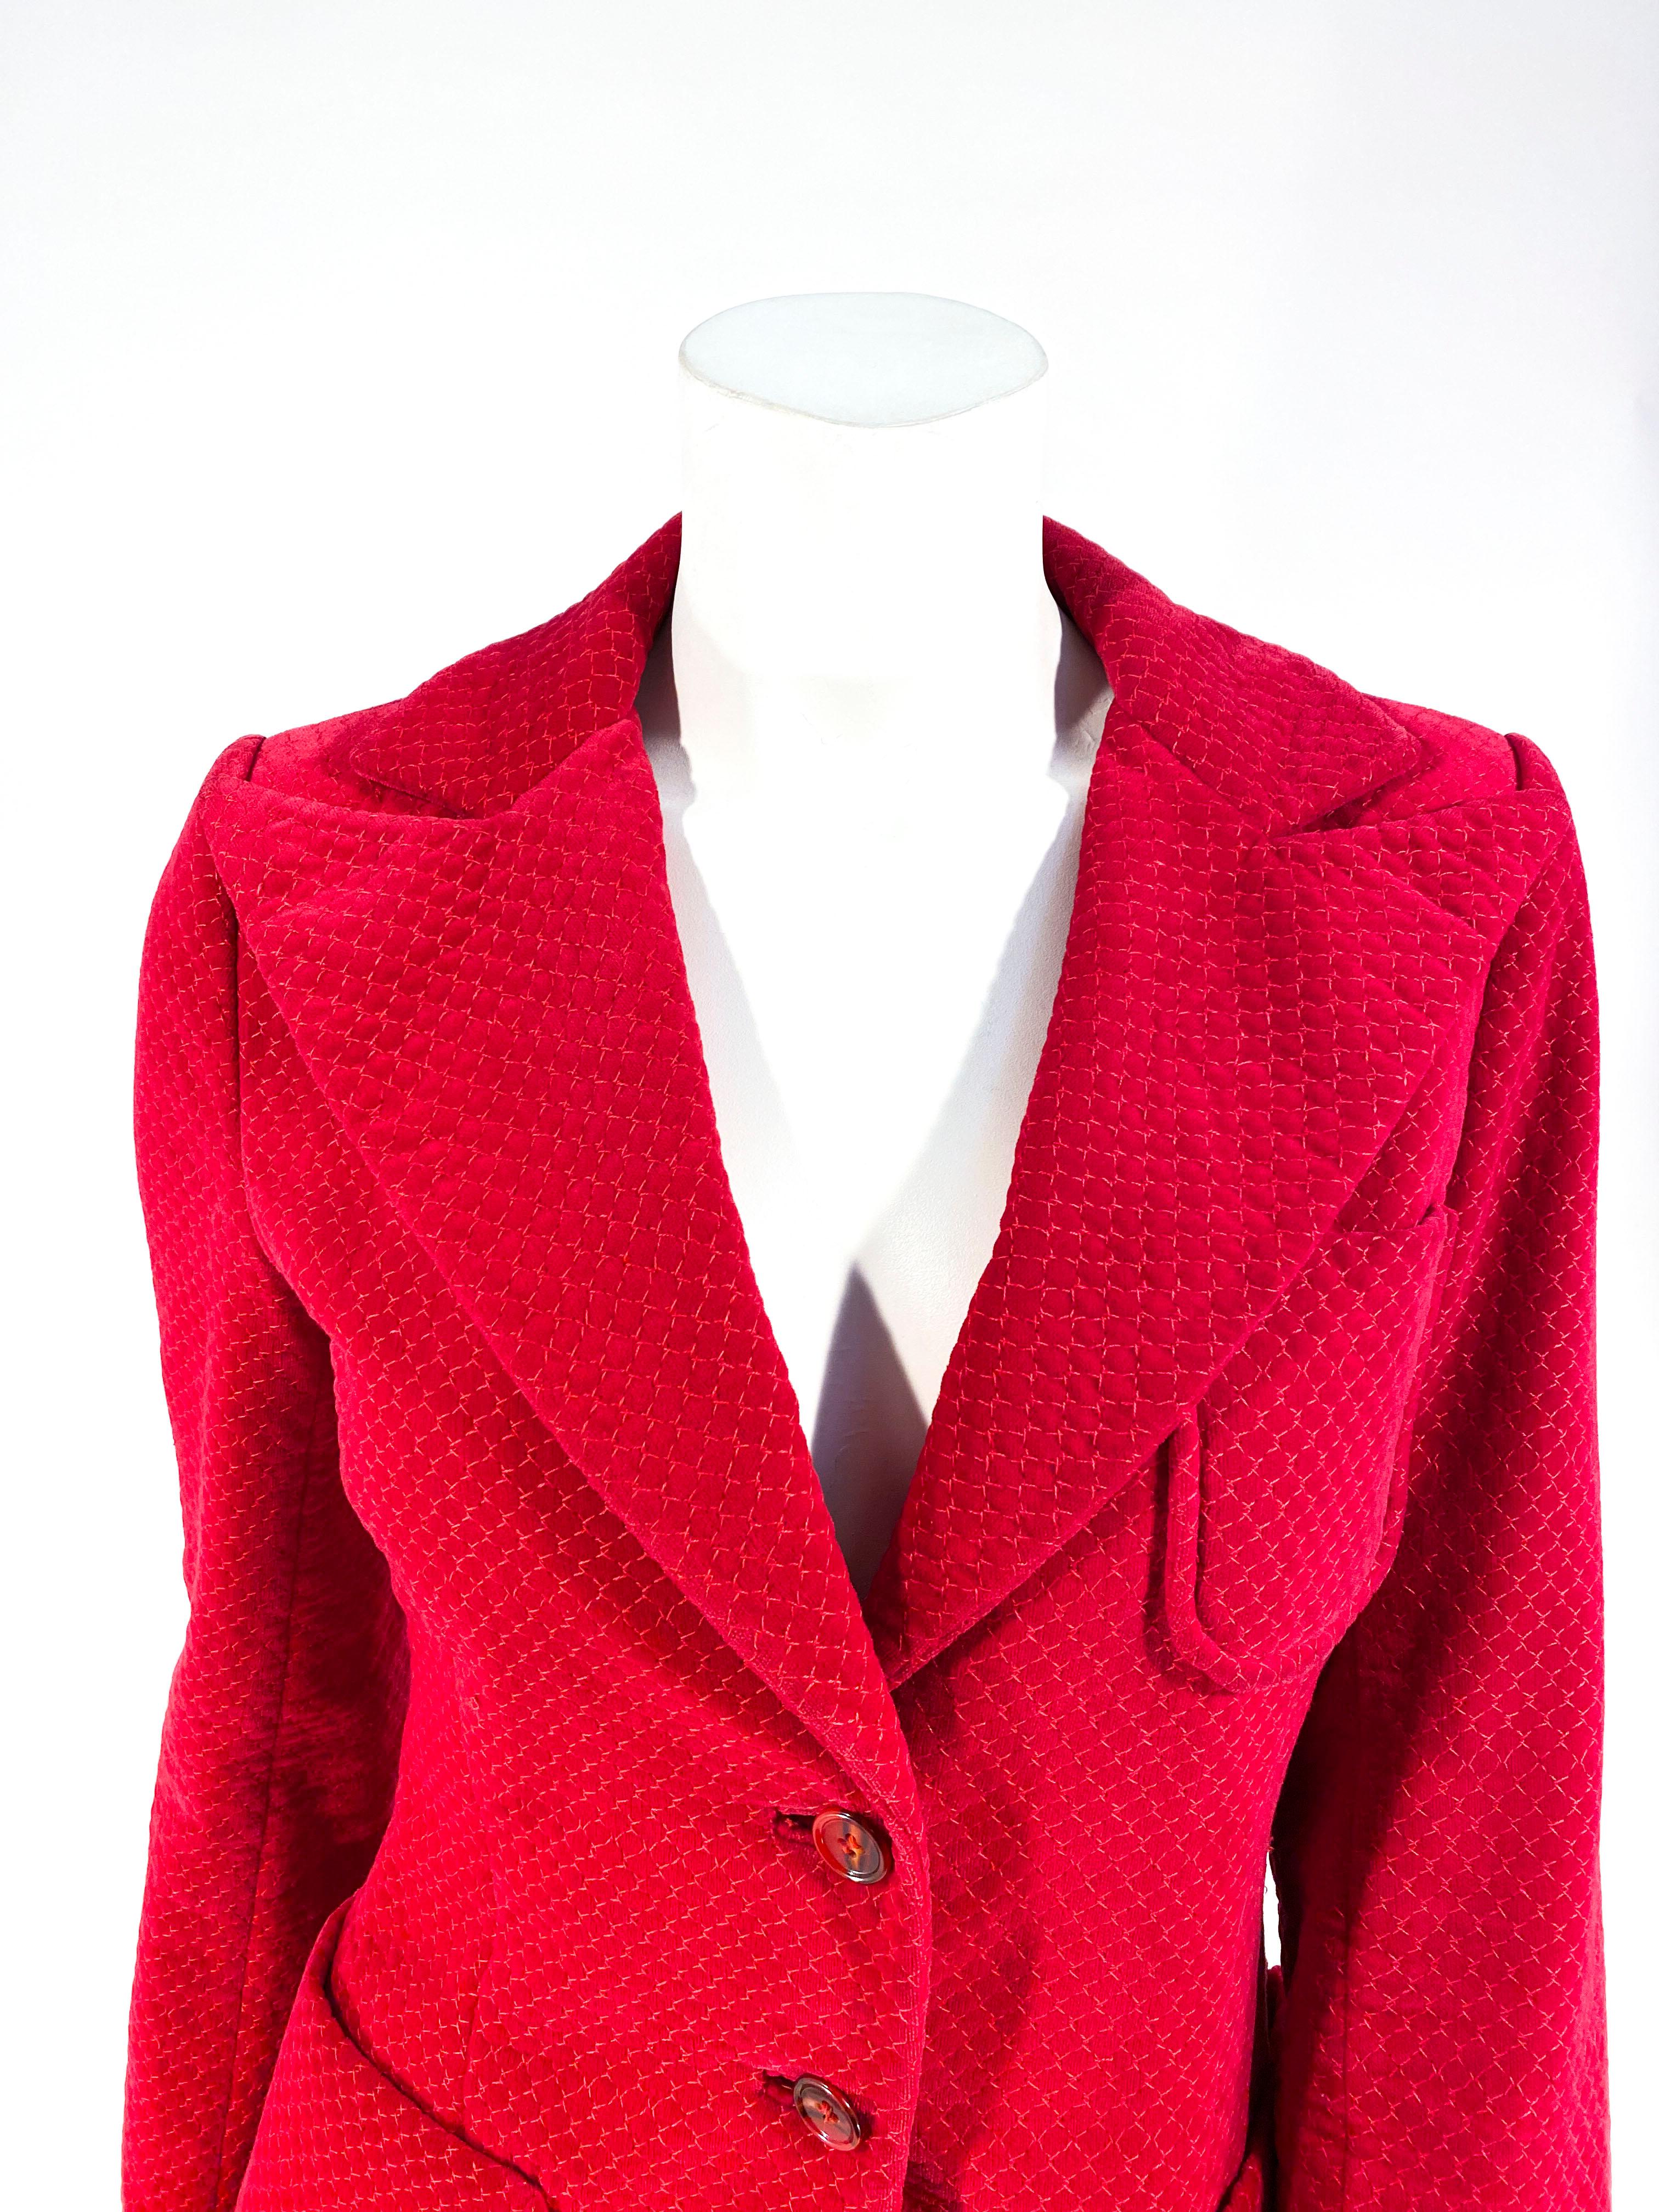 1970s Cranberry red patterned velvet blazer with a large peak lapel collar, two large patch pockets, and one small patch pocket an the bust. The interior is fully lined and the face as two red faux tortoise buttons. 